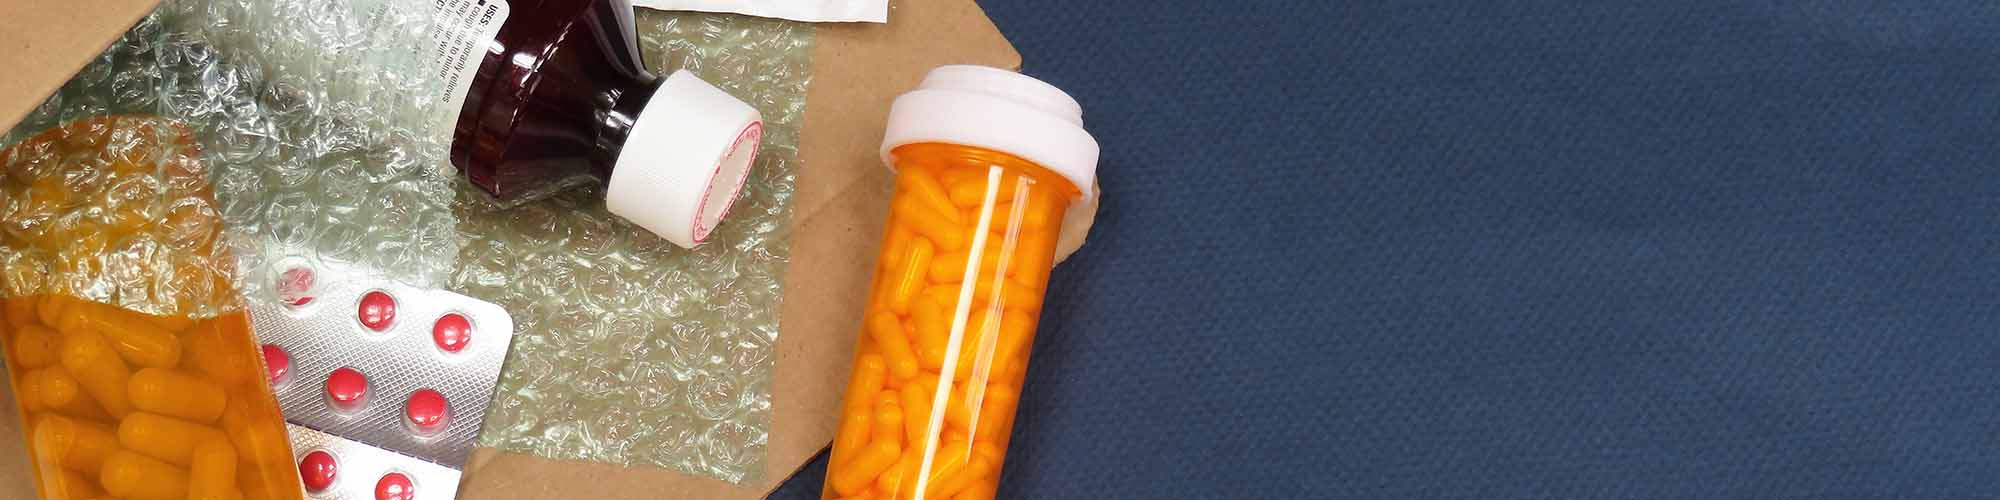 mail-order pharmaceuticals in envelop with bubble wrap